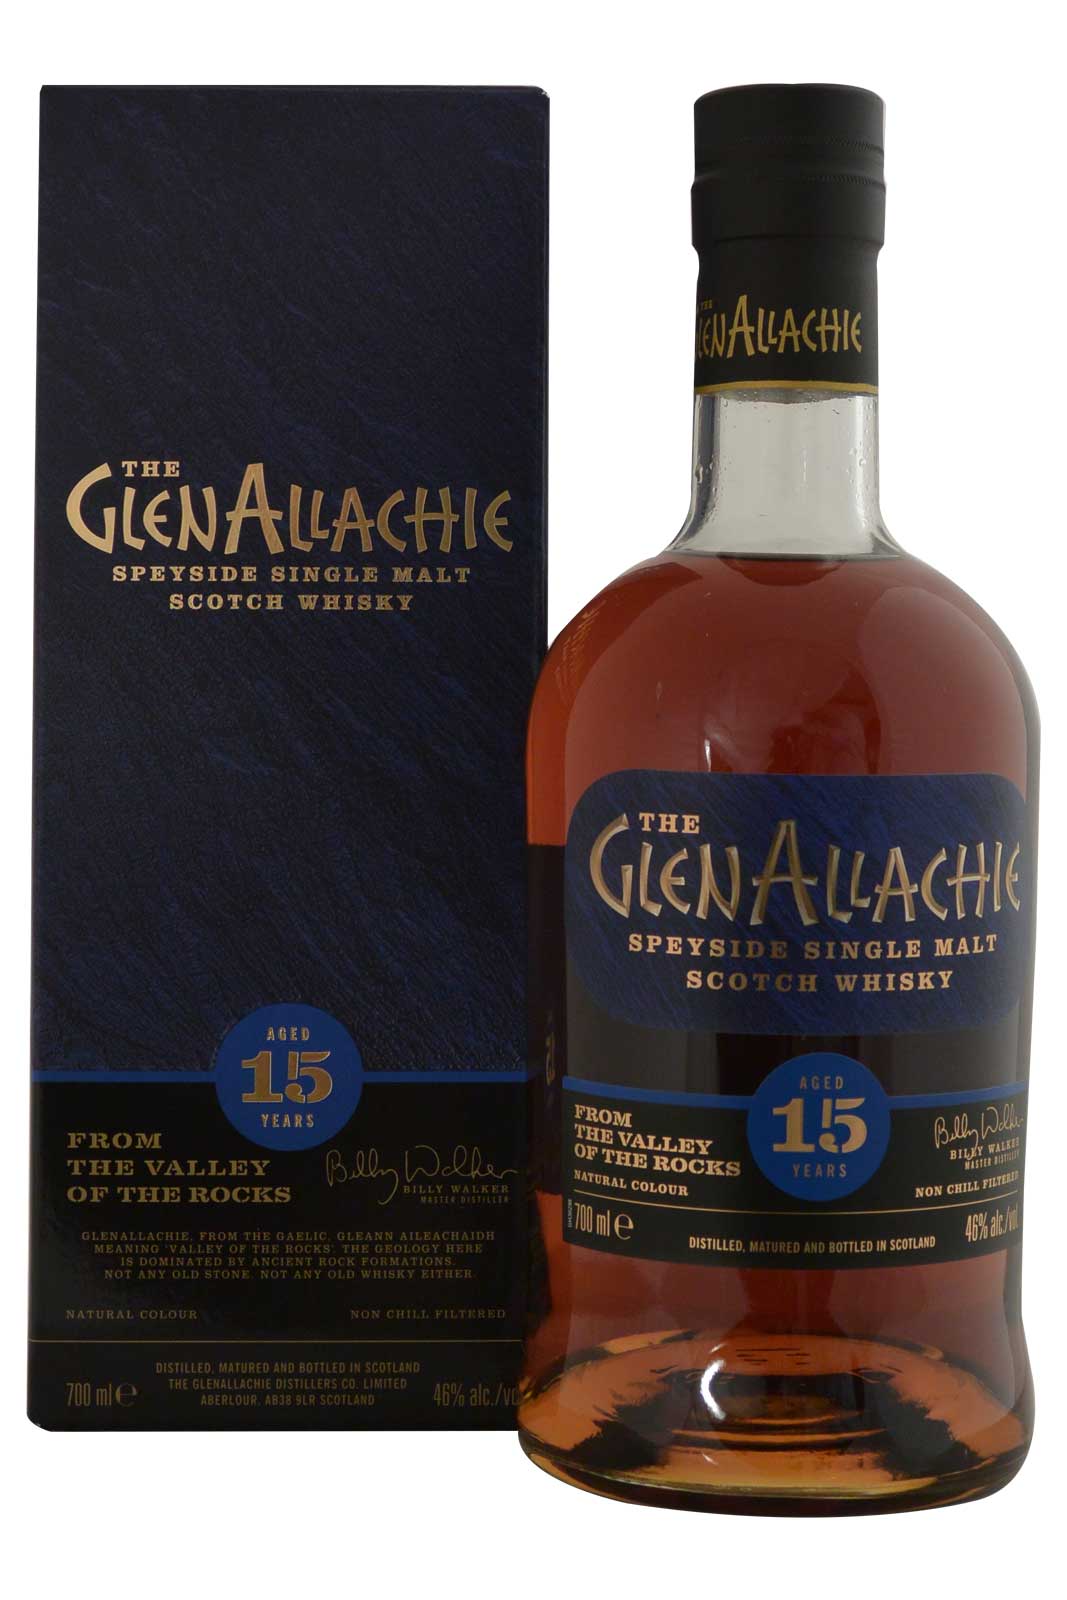 Glenallachie 15 Year Old - Valley of the Rocks